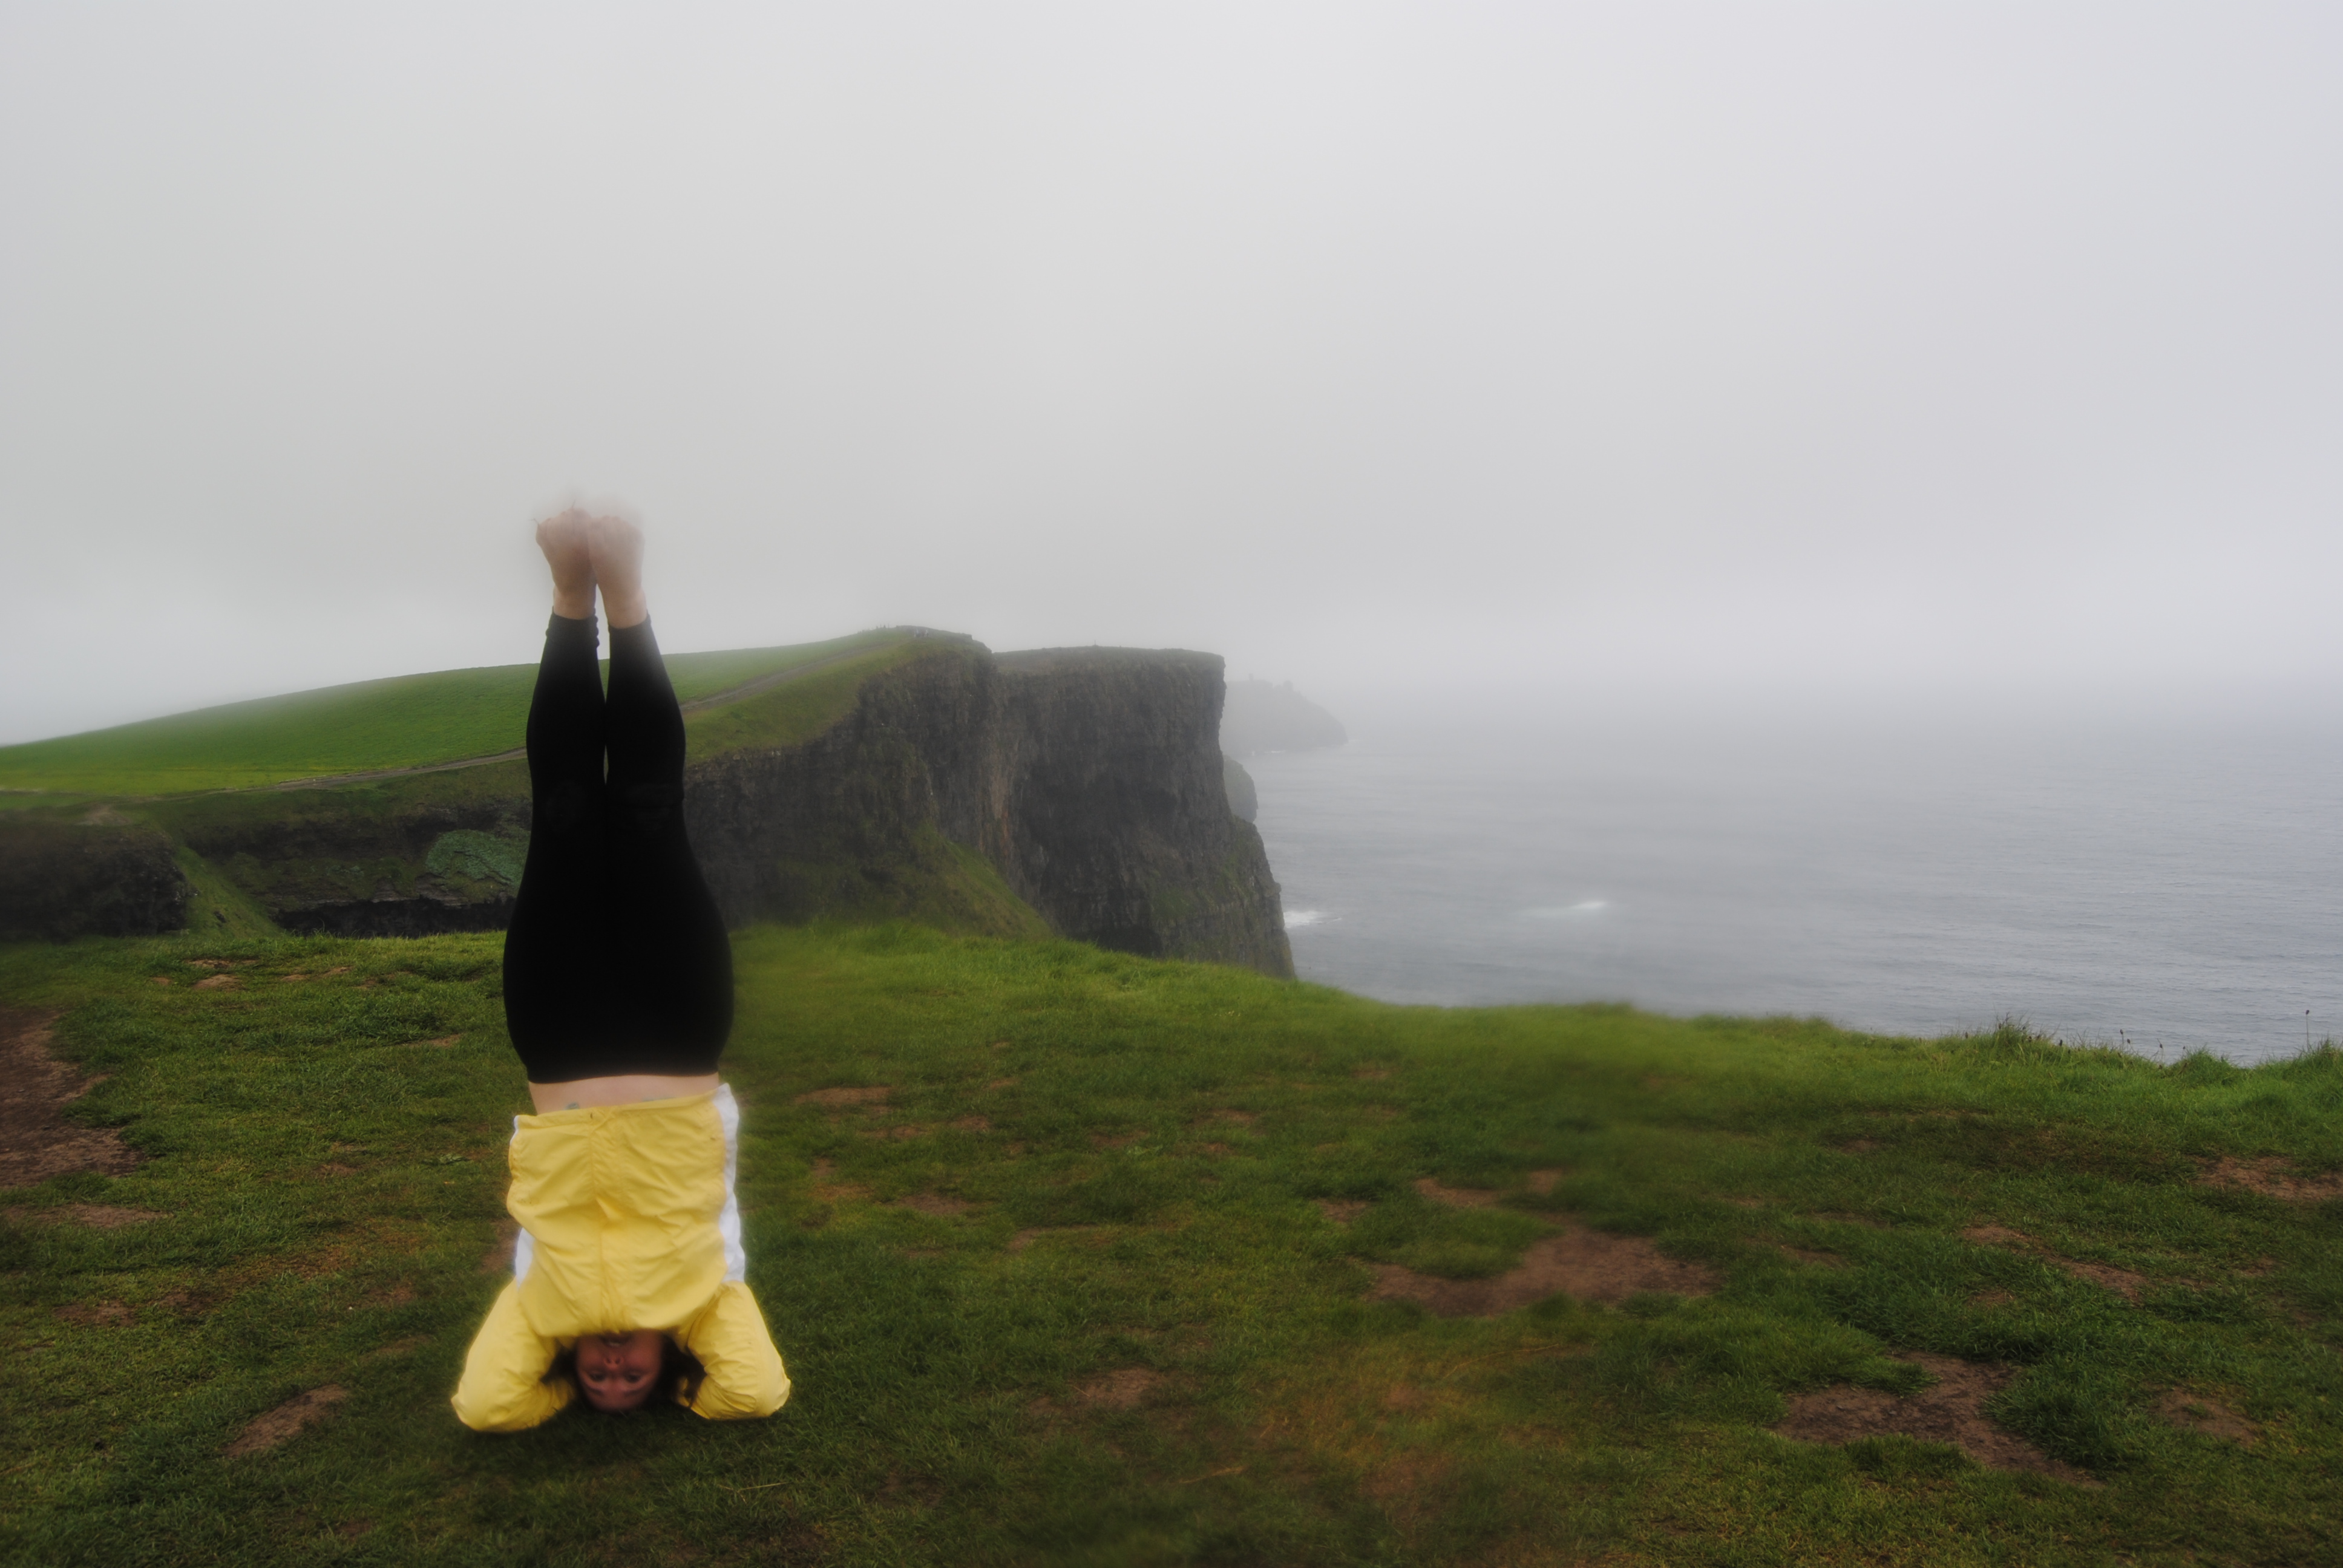 Namaste from the Cliffs of Moher!